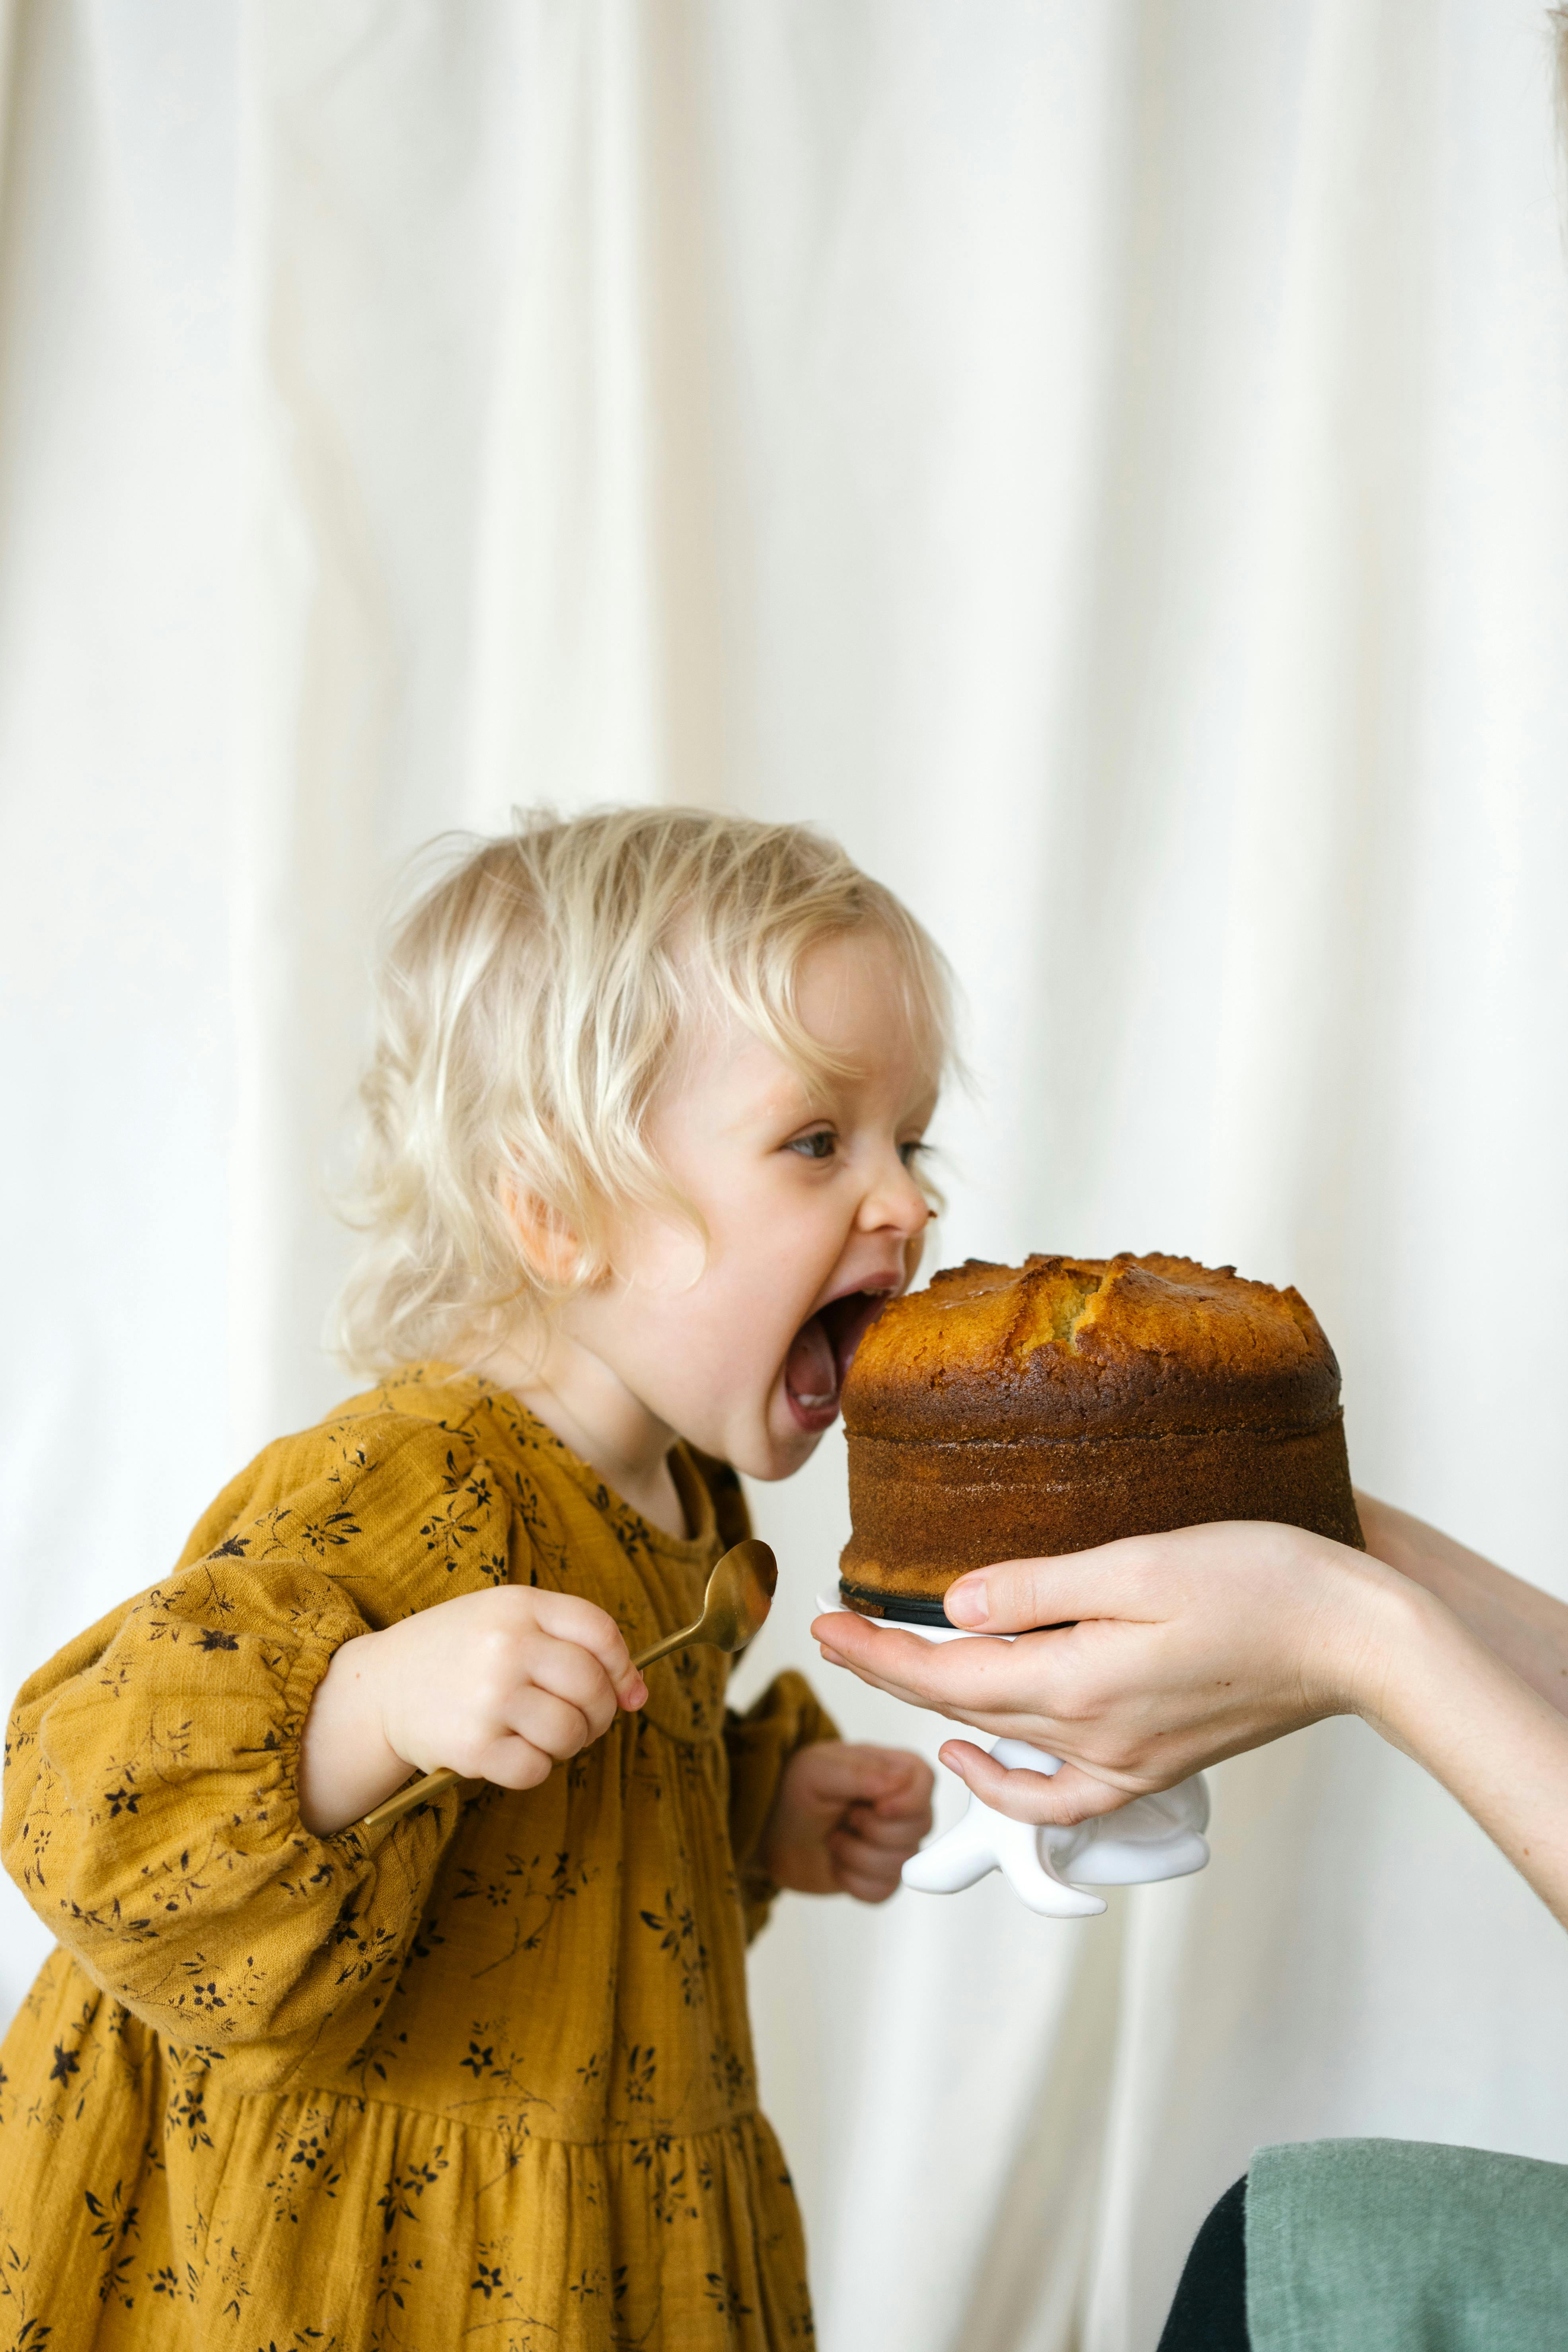 Free Photo of a Child Eating a Cake Stock Photo